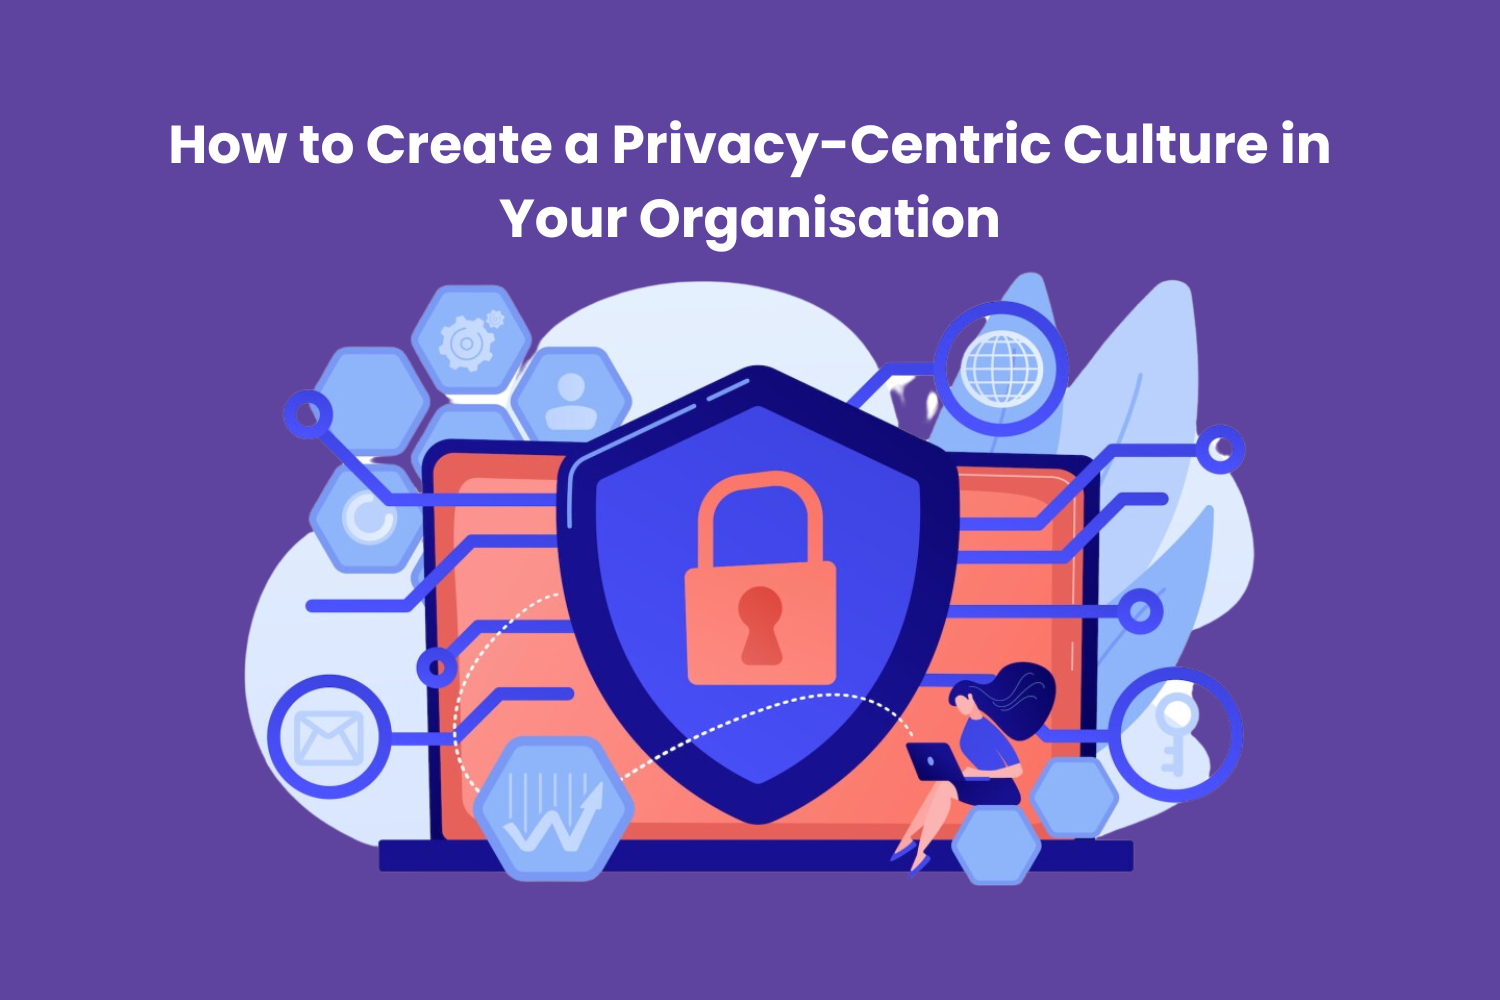 How to Create a Privacy-Centric Culture in Your Organisation